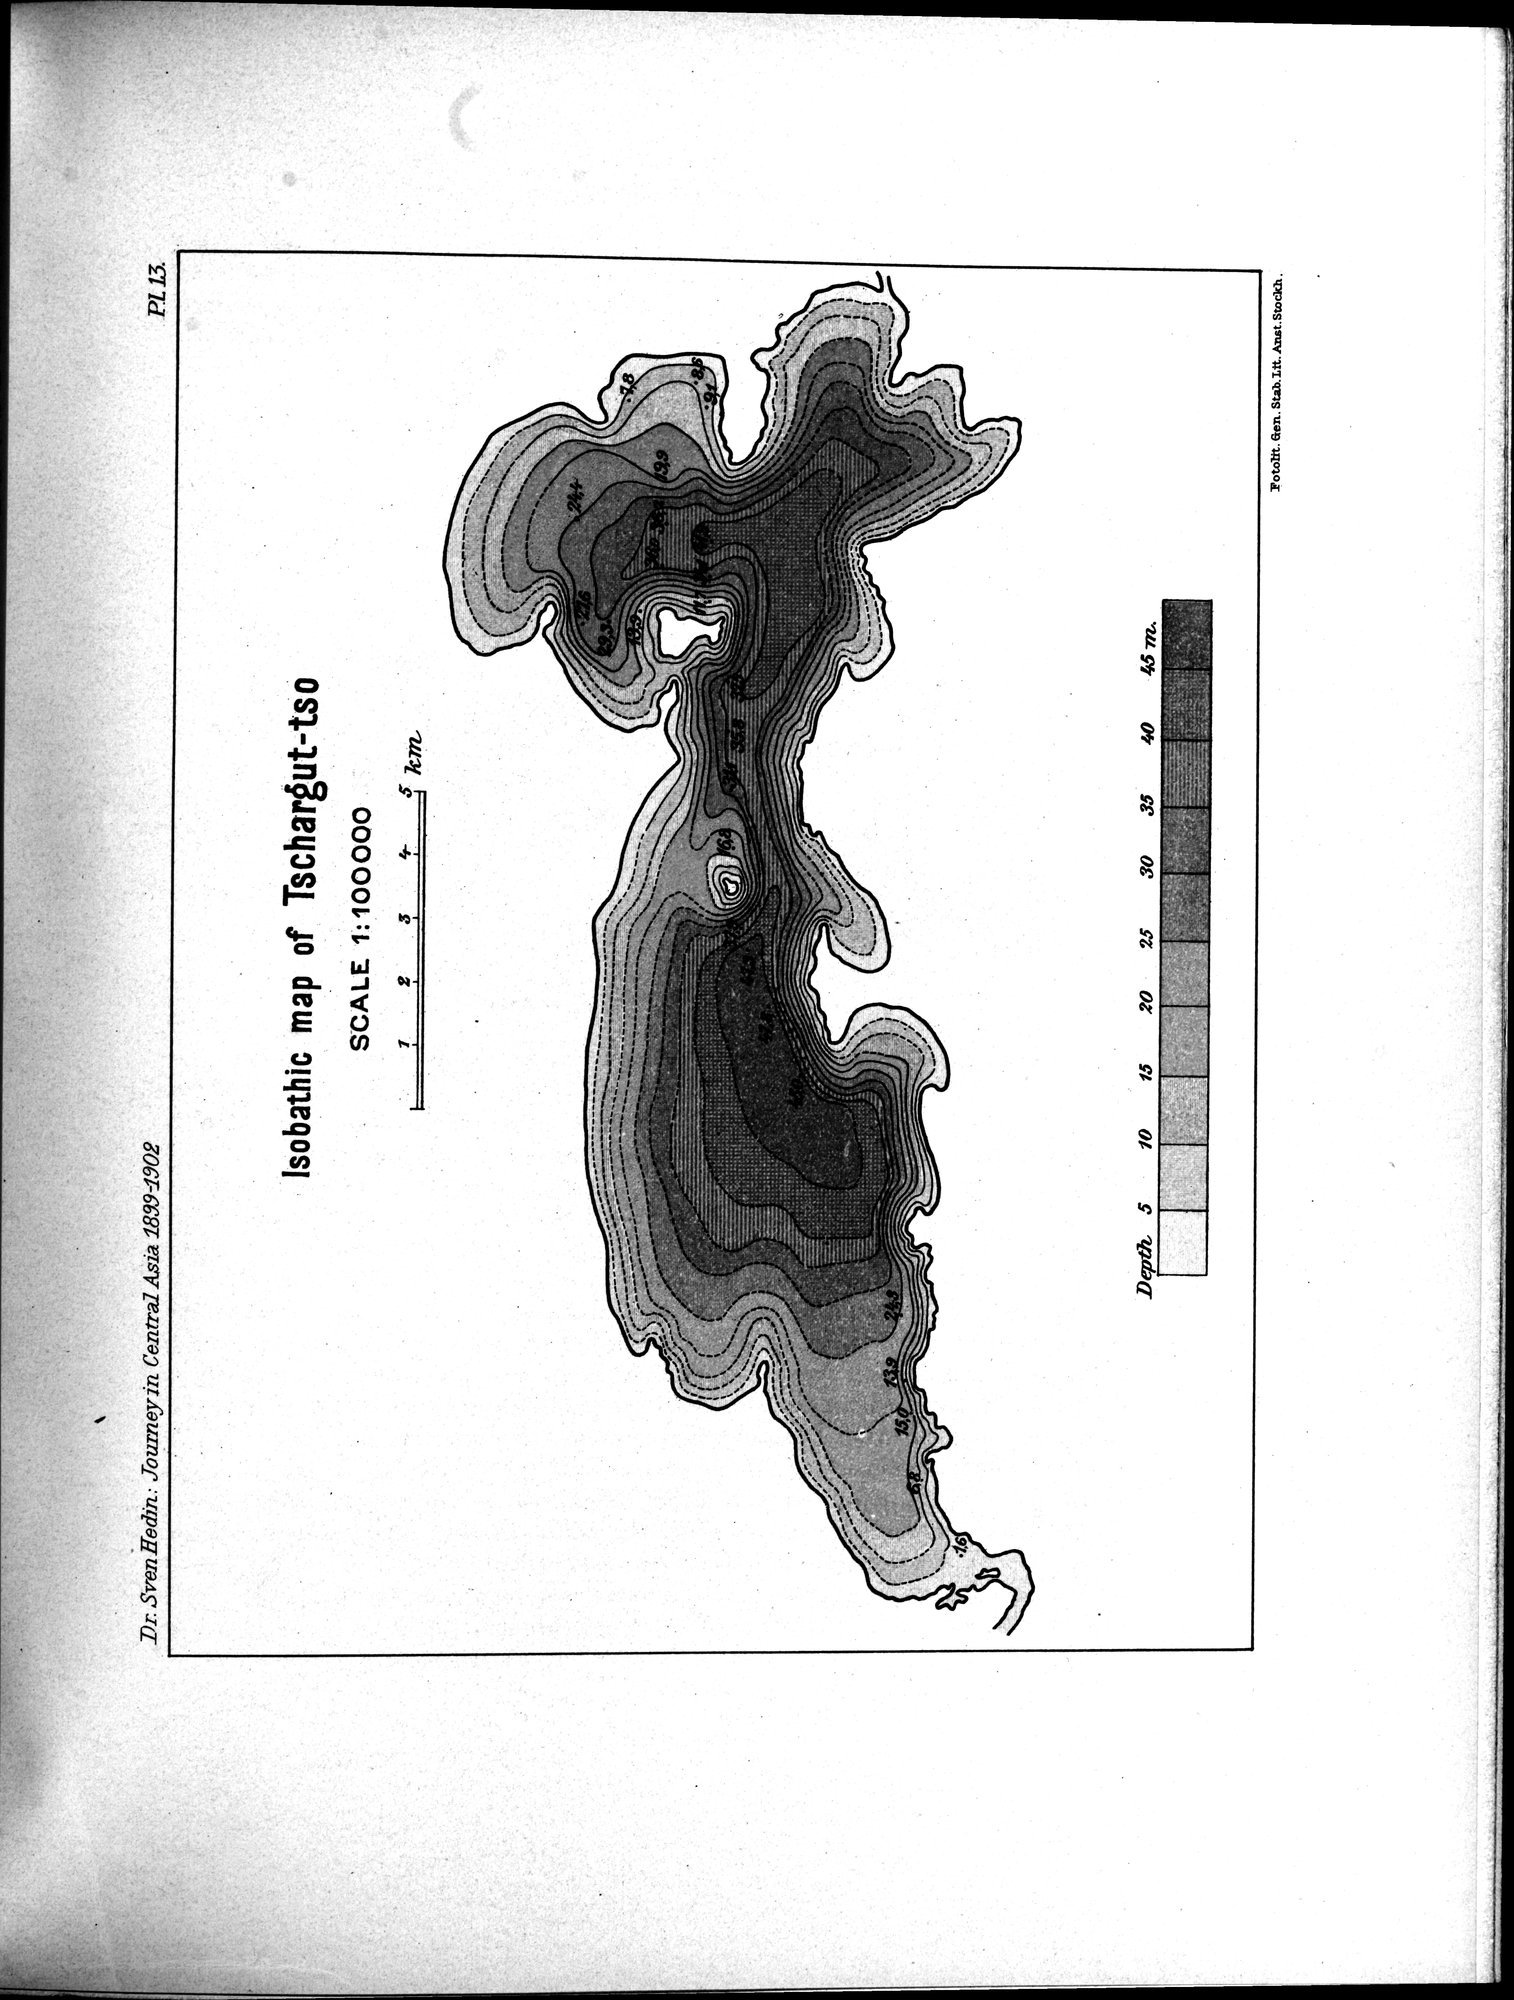 Scientific Results of a Journey in Central Asia, 1899-1902 : vol.4 / 129 ページ（白黒高解像度画像）